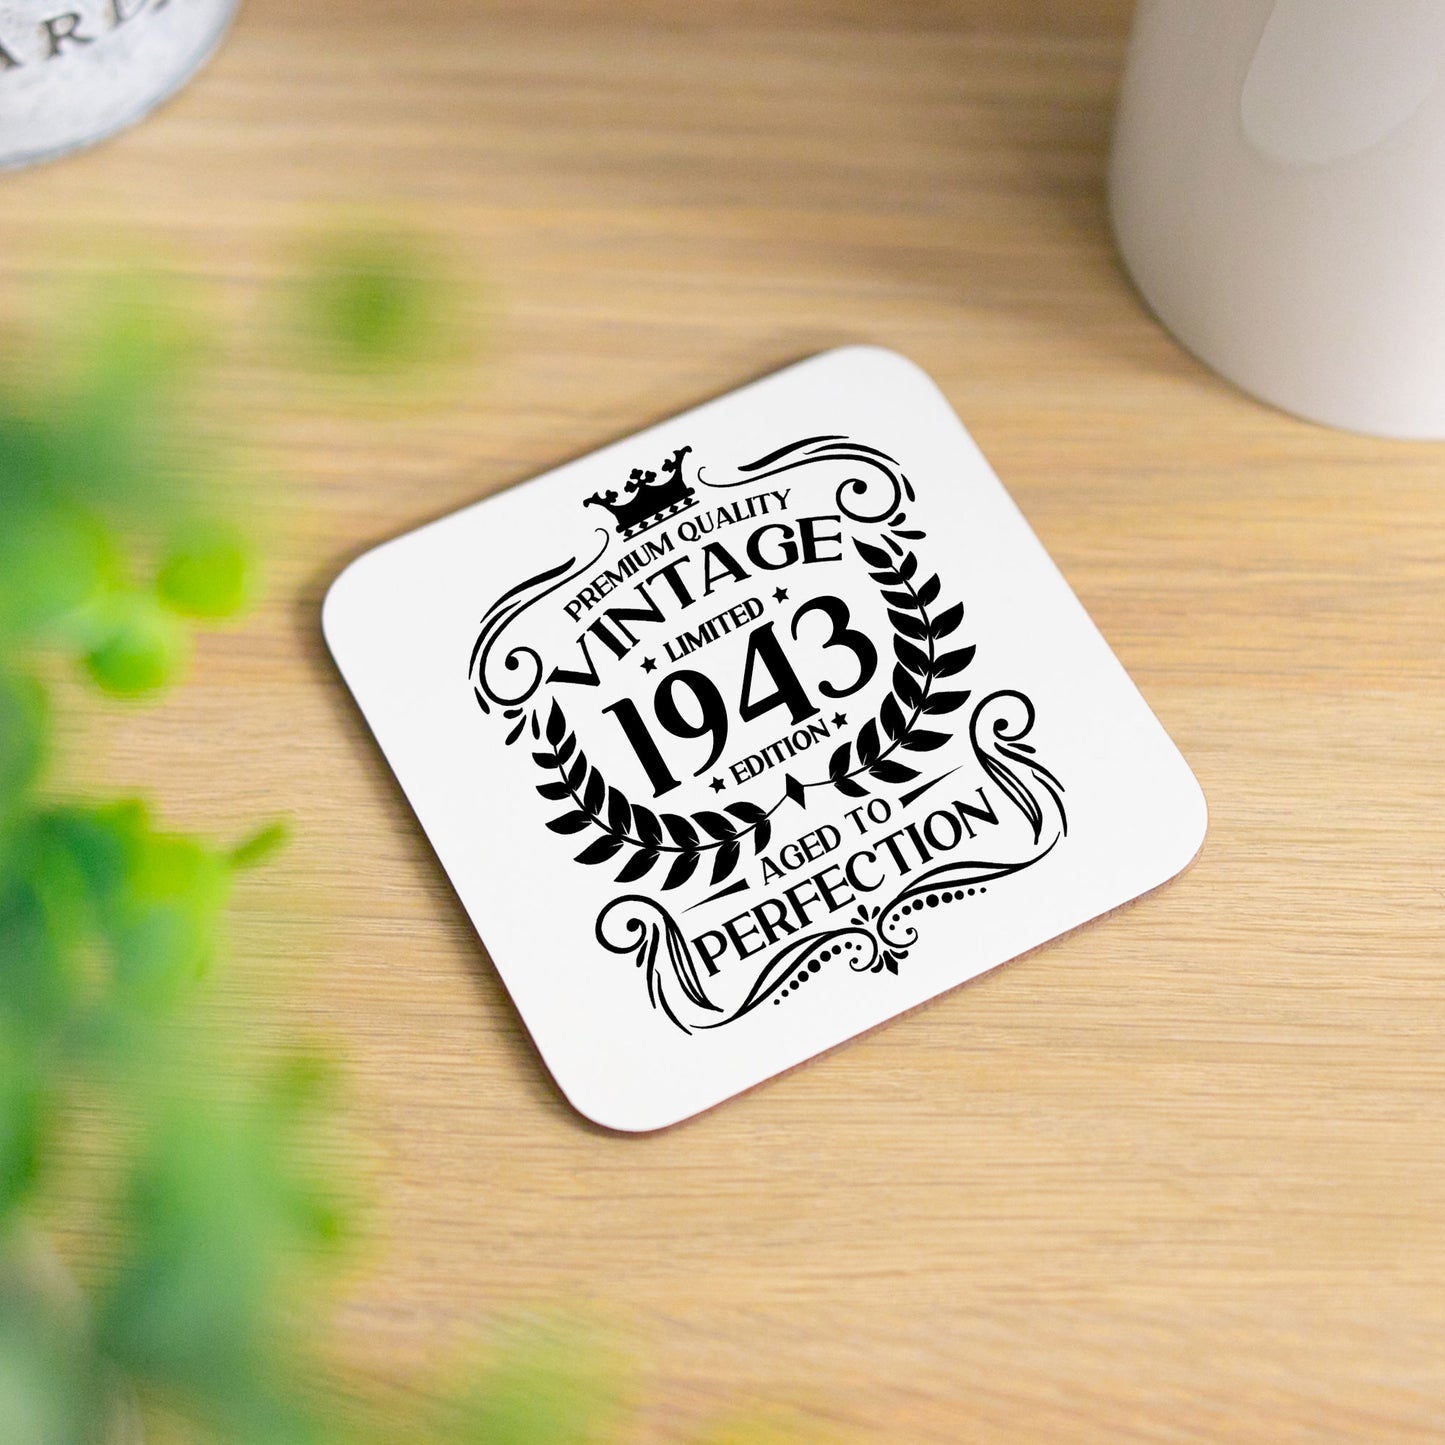 Vintage 1943 80th Birthday Engraved Wine Glass Gift  - Always Looking Good - Glass & Printed Coaster  